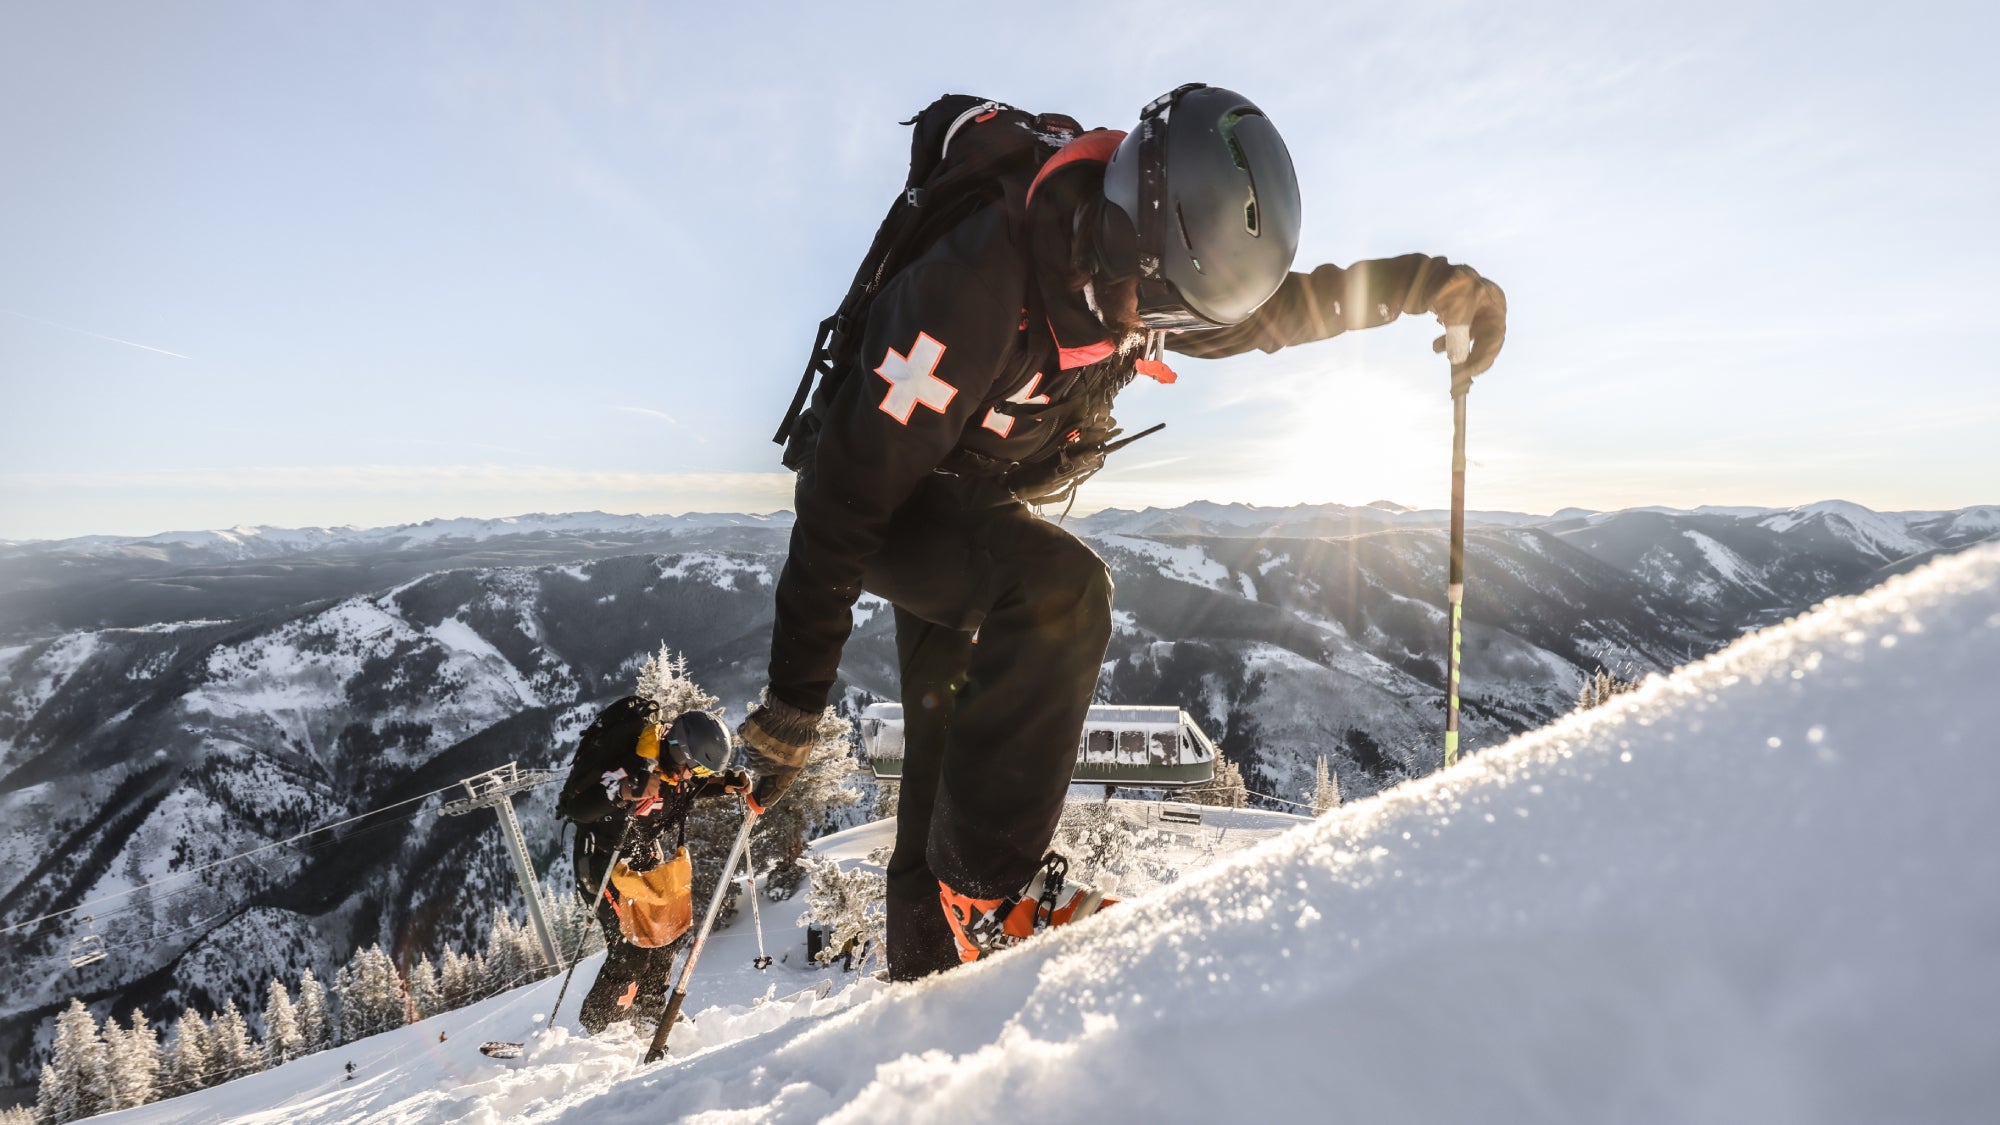 Luke Demuth and another team member boot-pack up a snowy mountain slope